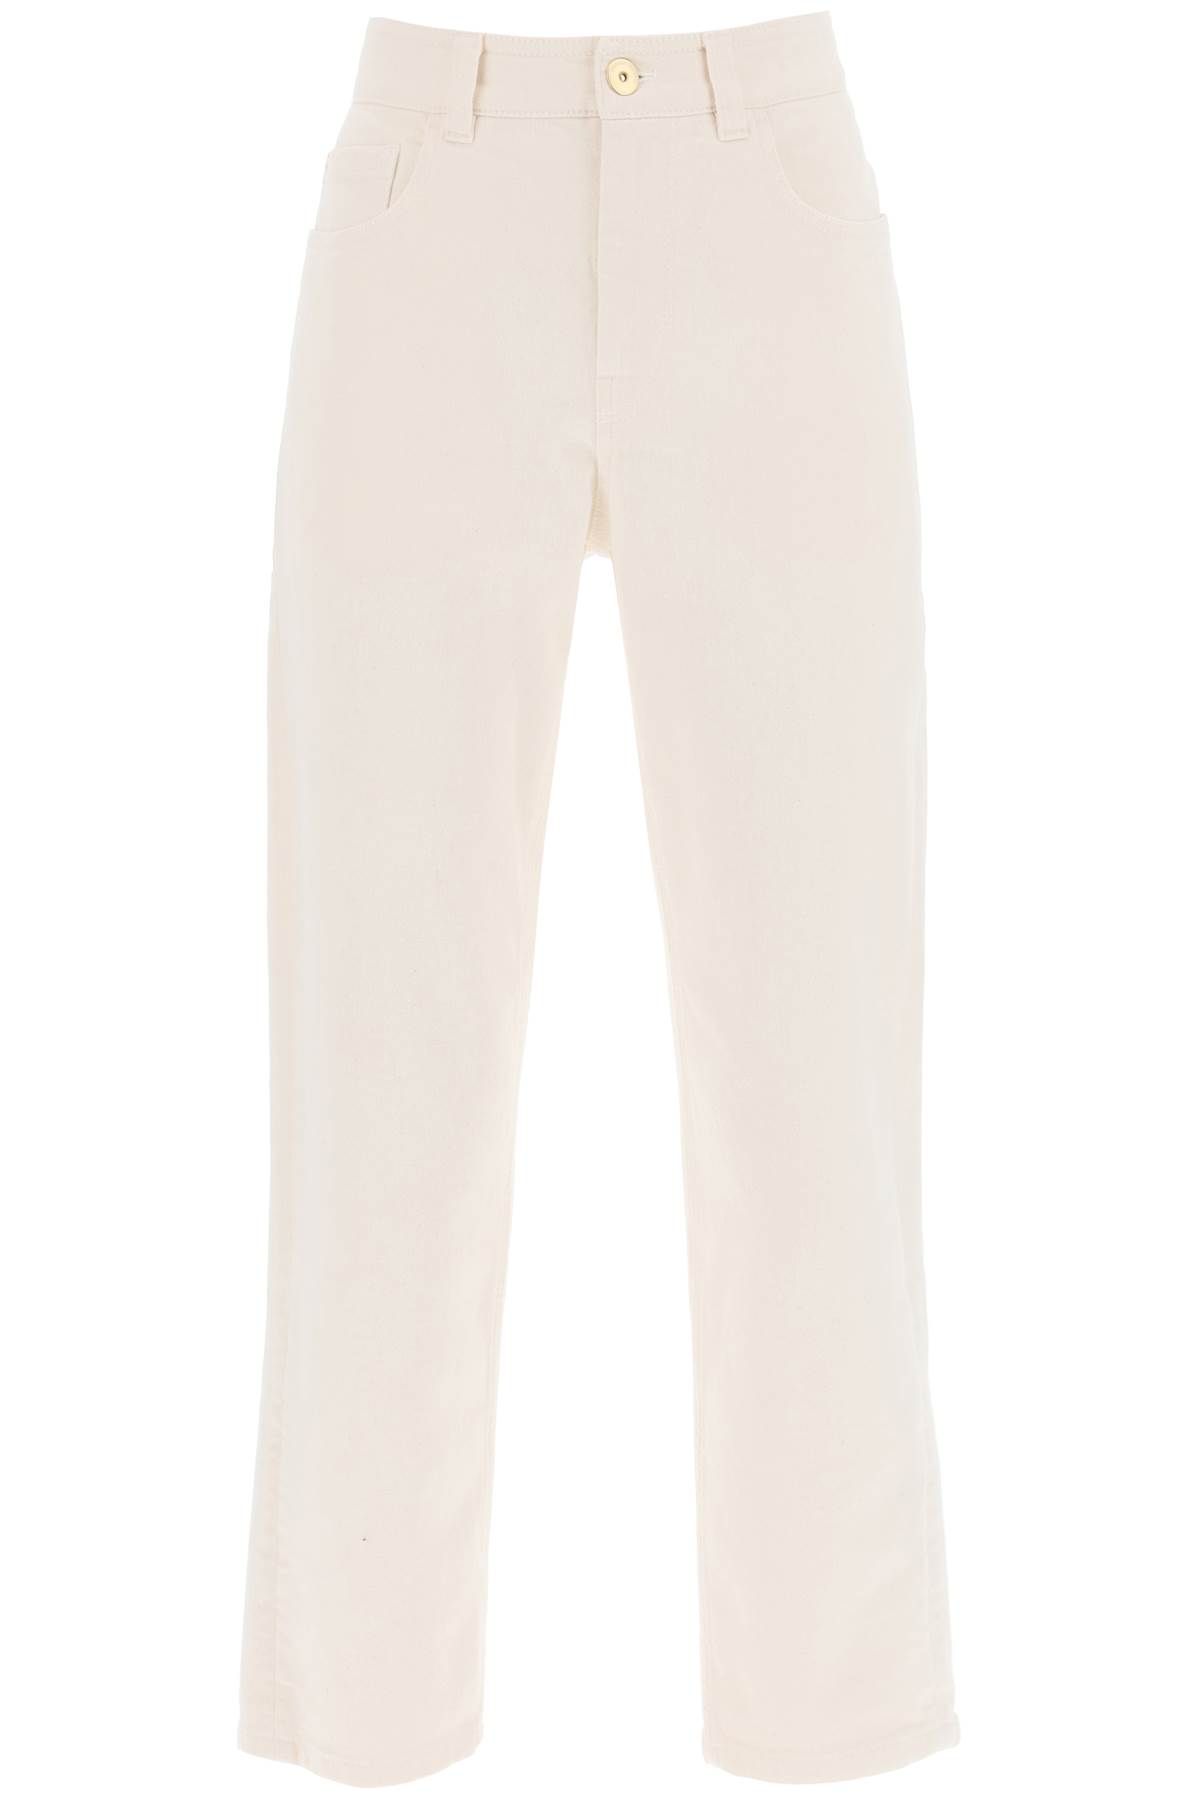 BRUNELLO CUCINELLI able cotton denim jeans for everyday wear.